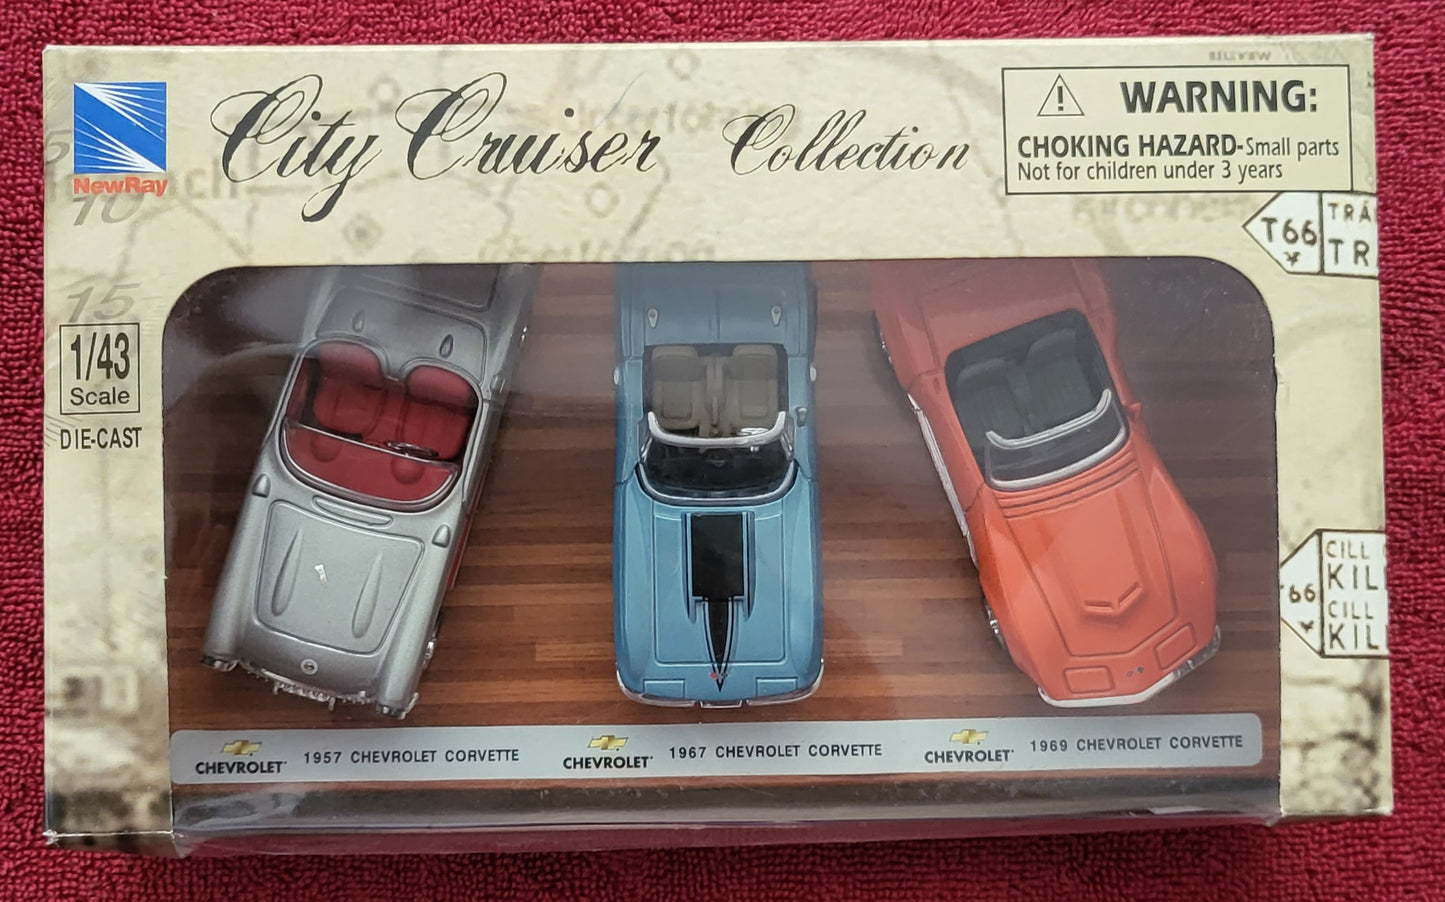 1957 1967 1969 Chevrolet Corvette Convertible New Ray City Cruiser Collection 1:43 NEW